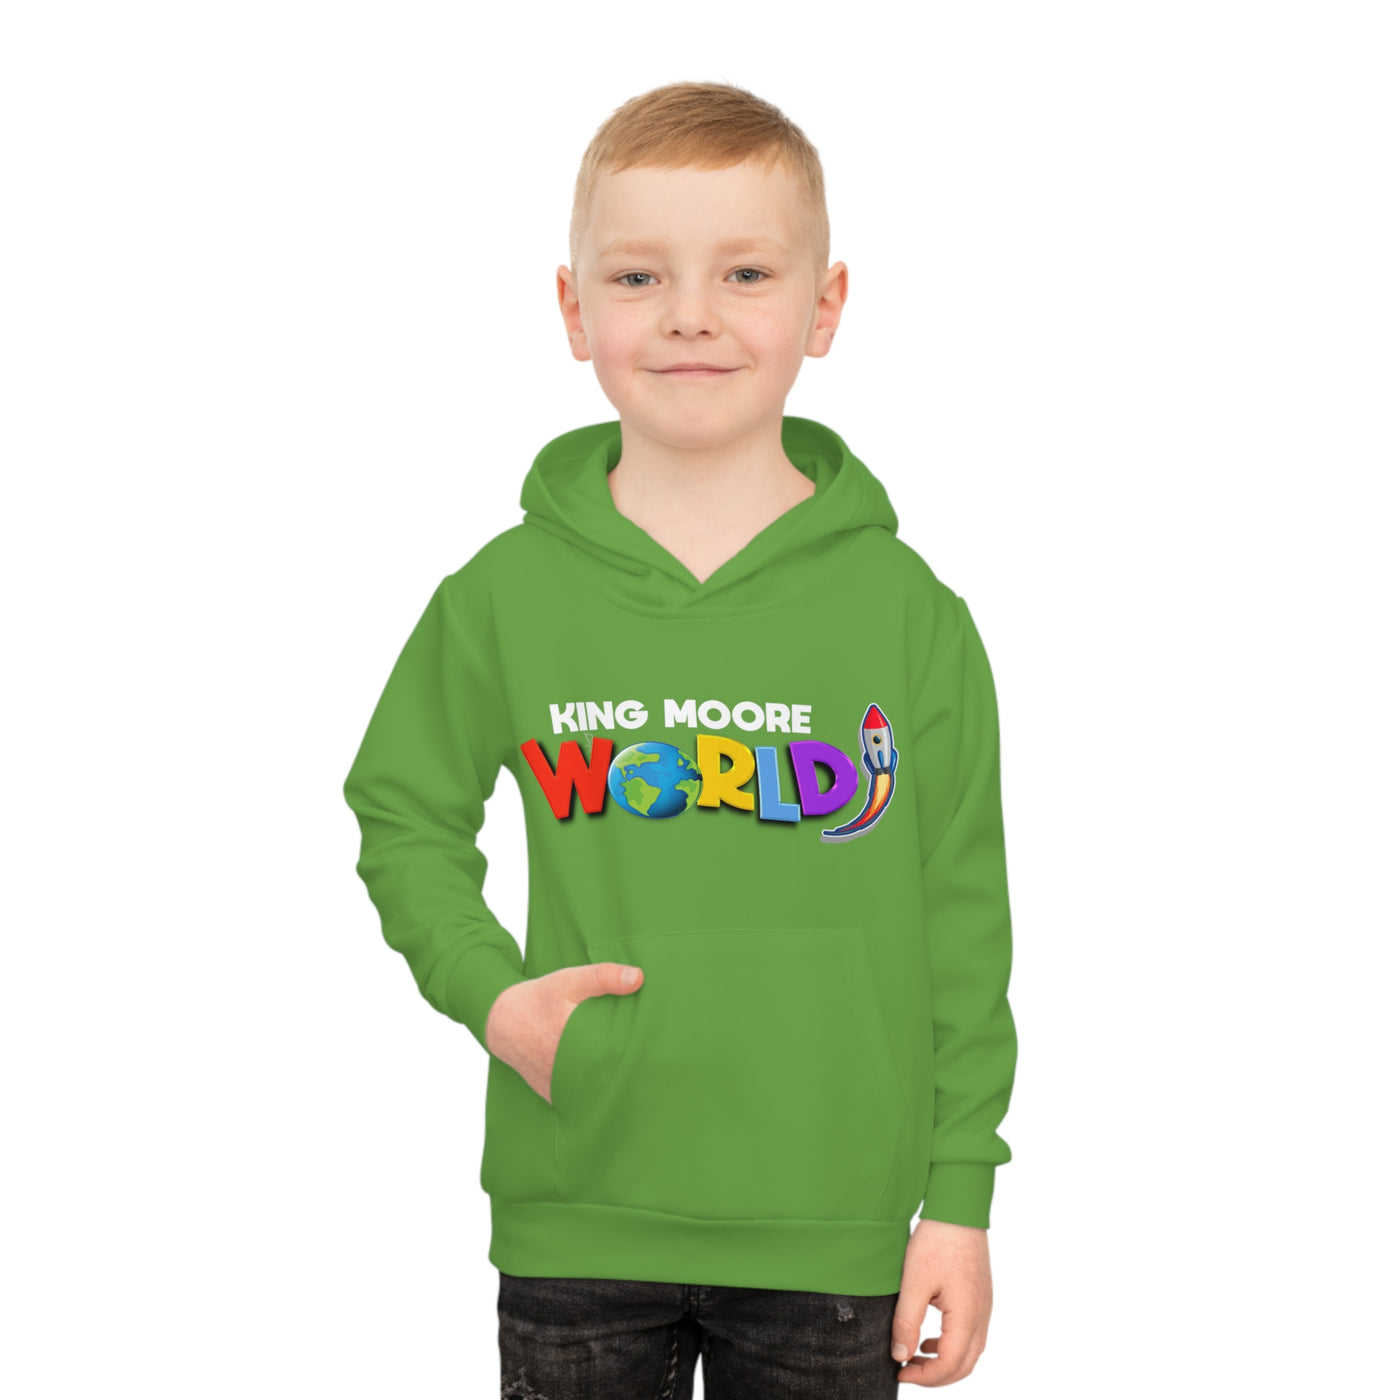 King Moore World Kids Hoodie (Green) Sublimation